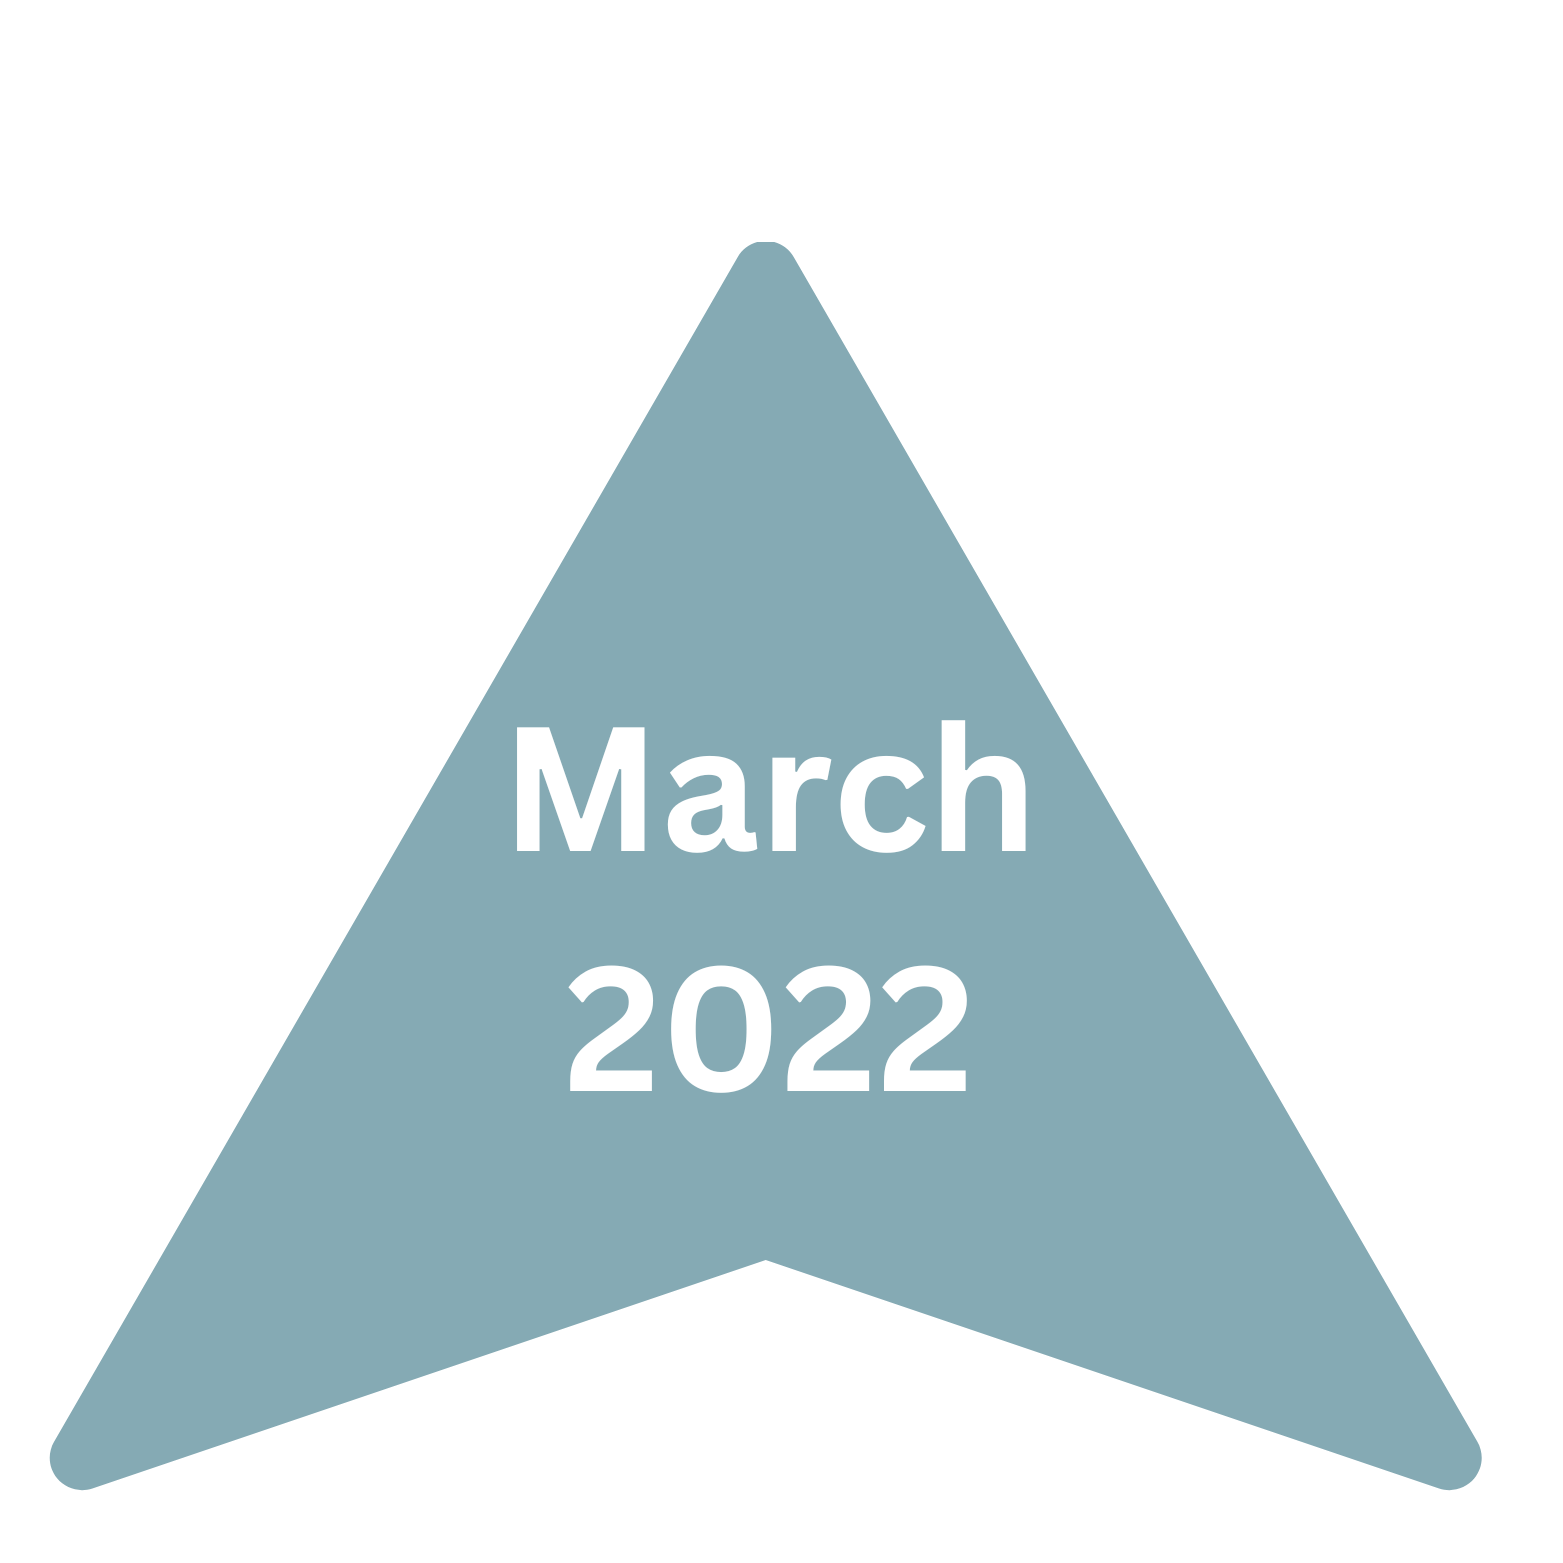 March 2022 